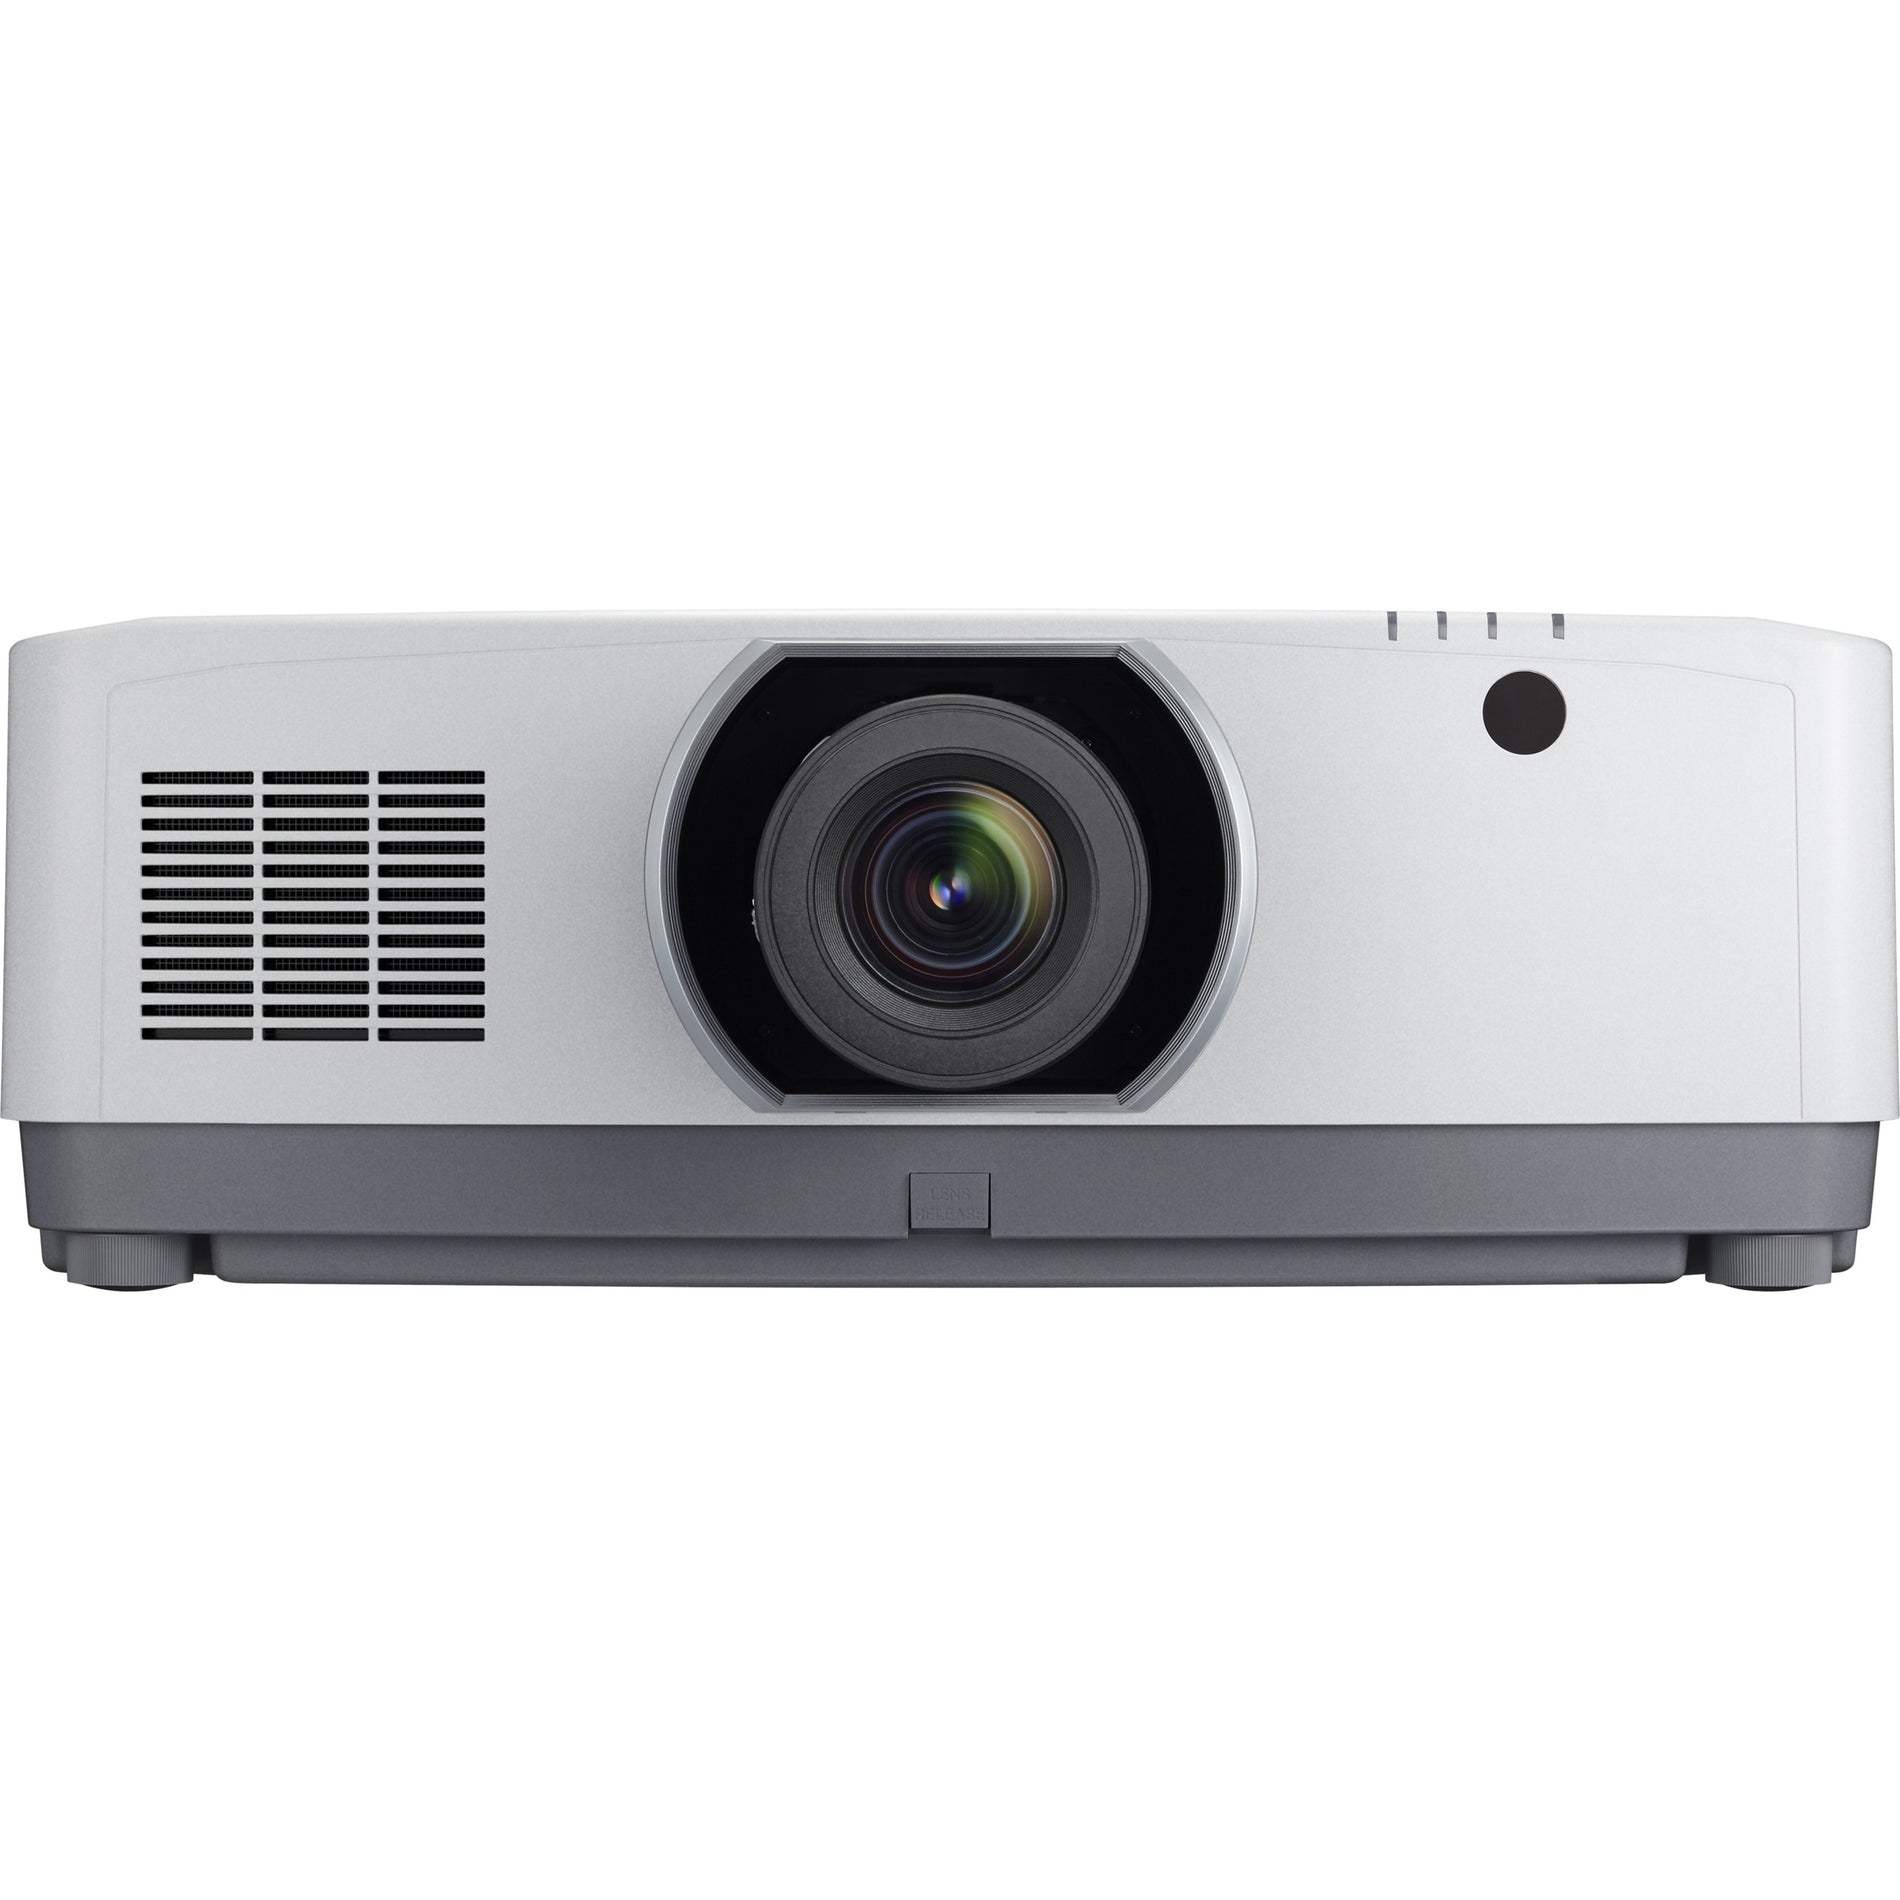 NEC Display NP-PA703UL 7000-Lumen Professional Installation Projector w/ 4K Support, Laser Lamp, 16:10 Aspect Ratio